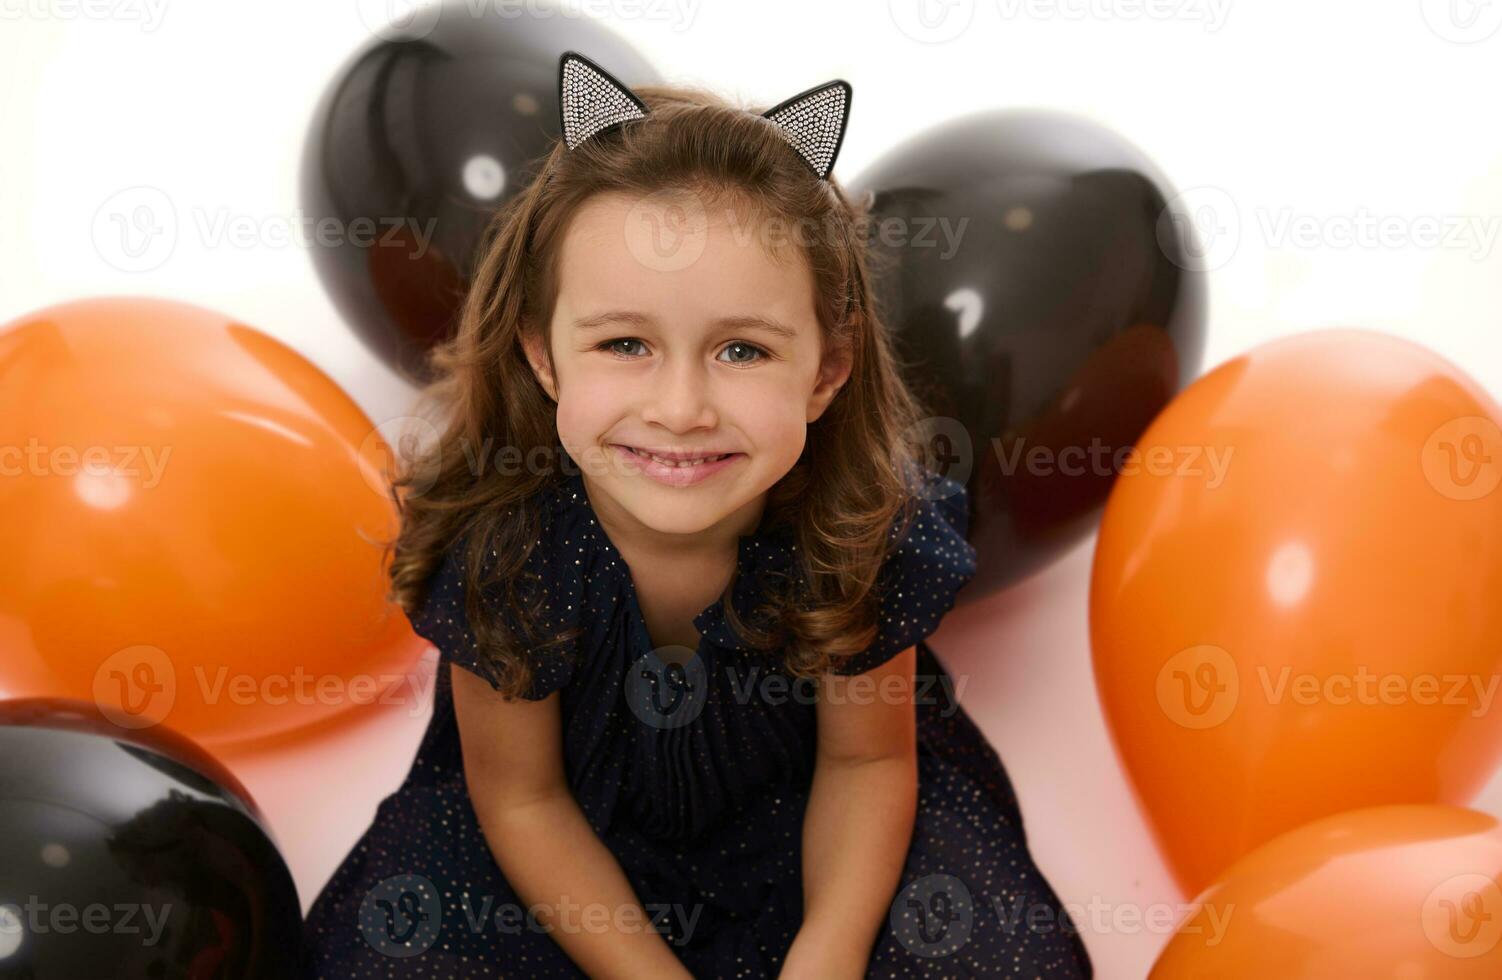 Close-up portrait of a cute little girl smiling with beautiful toothy smile looking at camera on the white background with lying down inflated black and orange colored balloons. Halloween concept photo